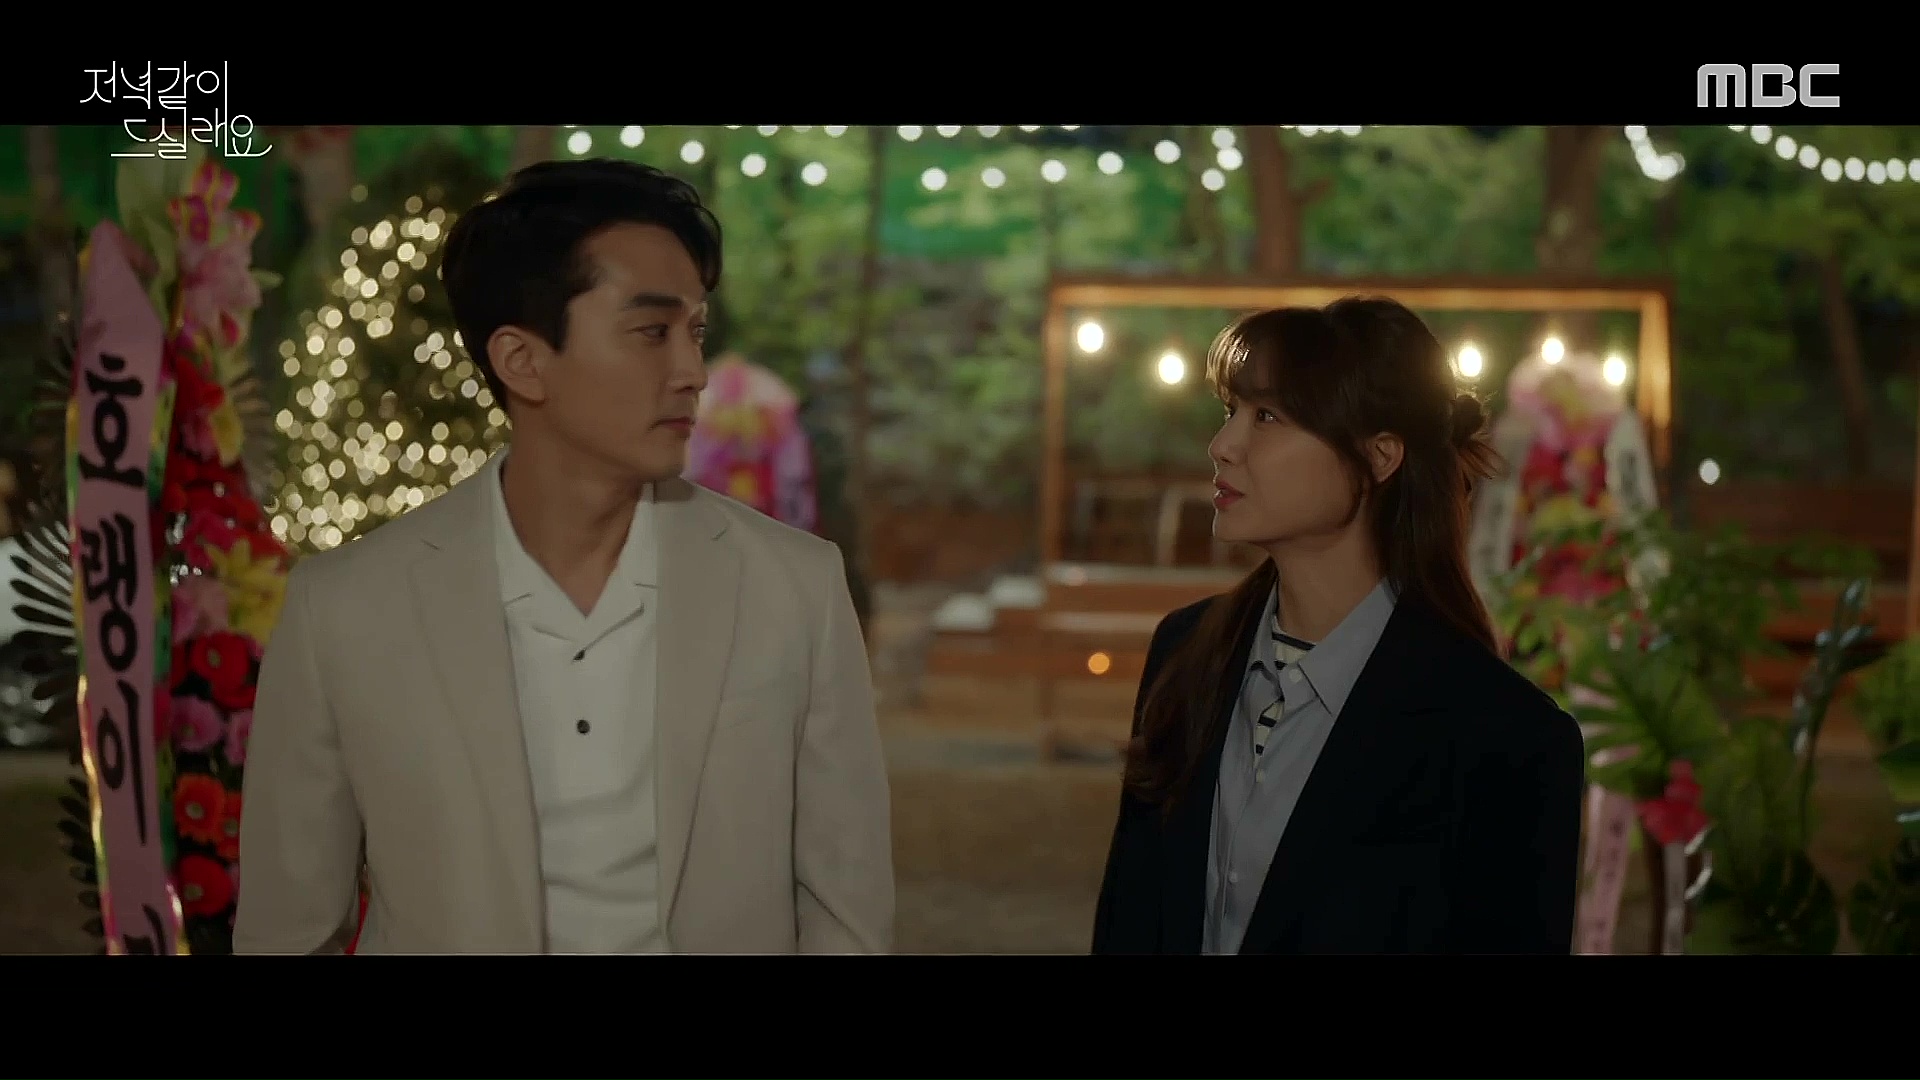 Will You Have Dinner With Me: Episodes 9-10